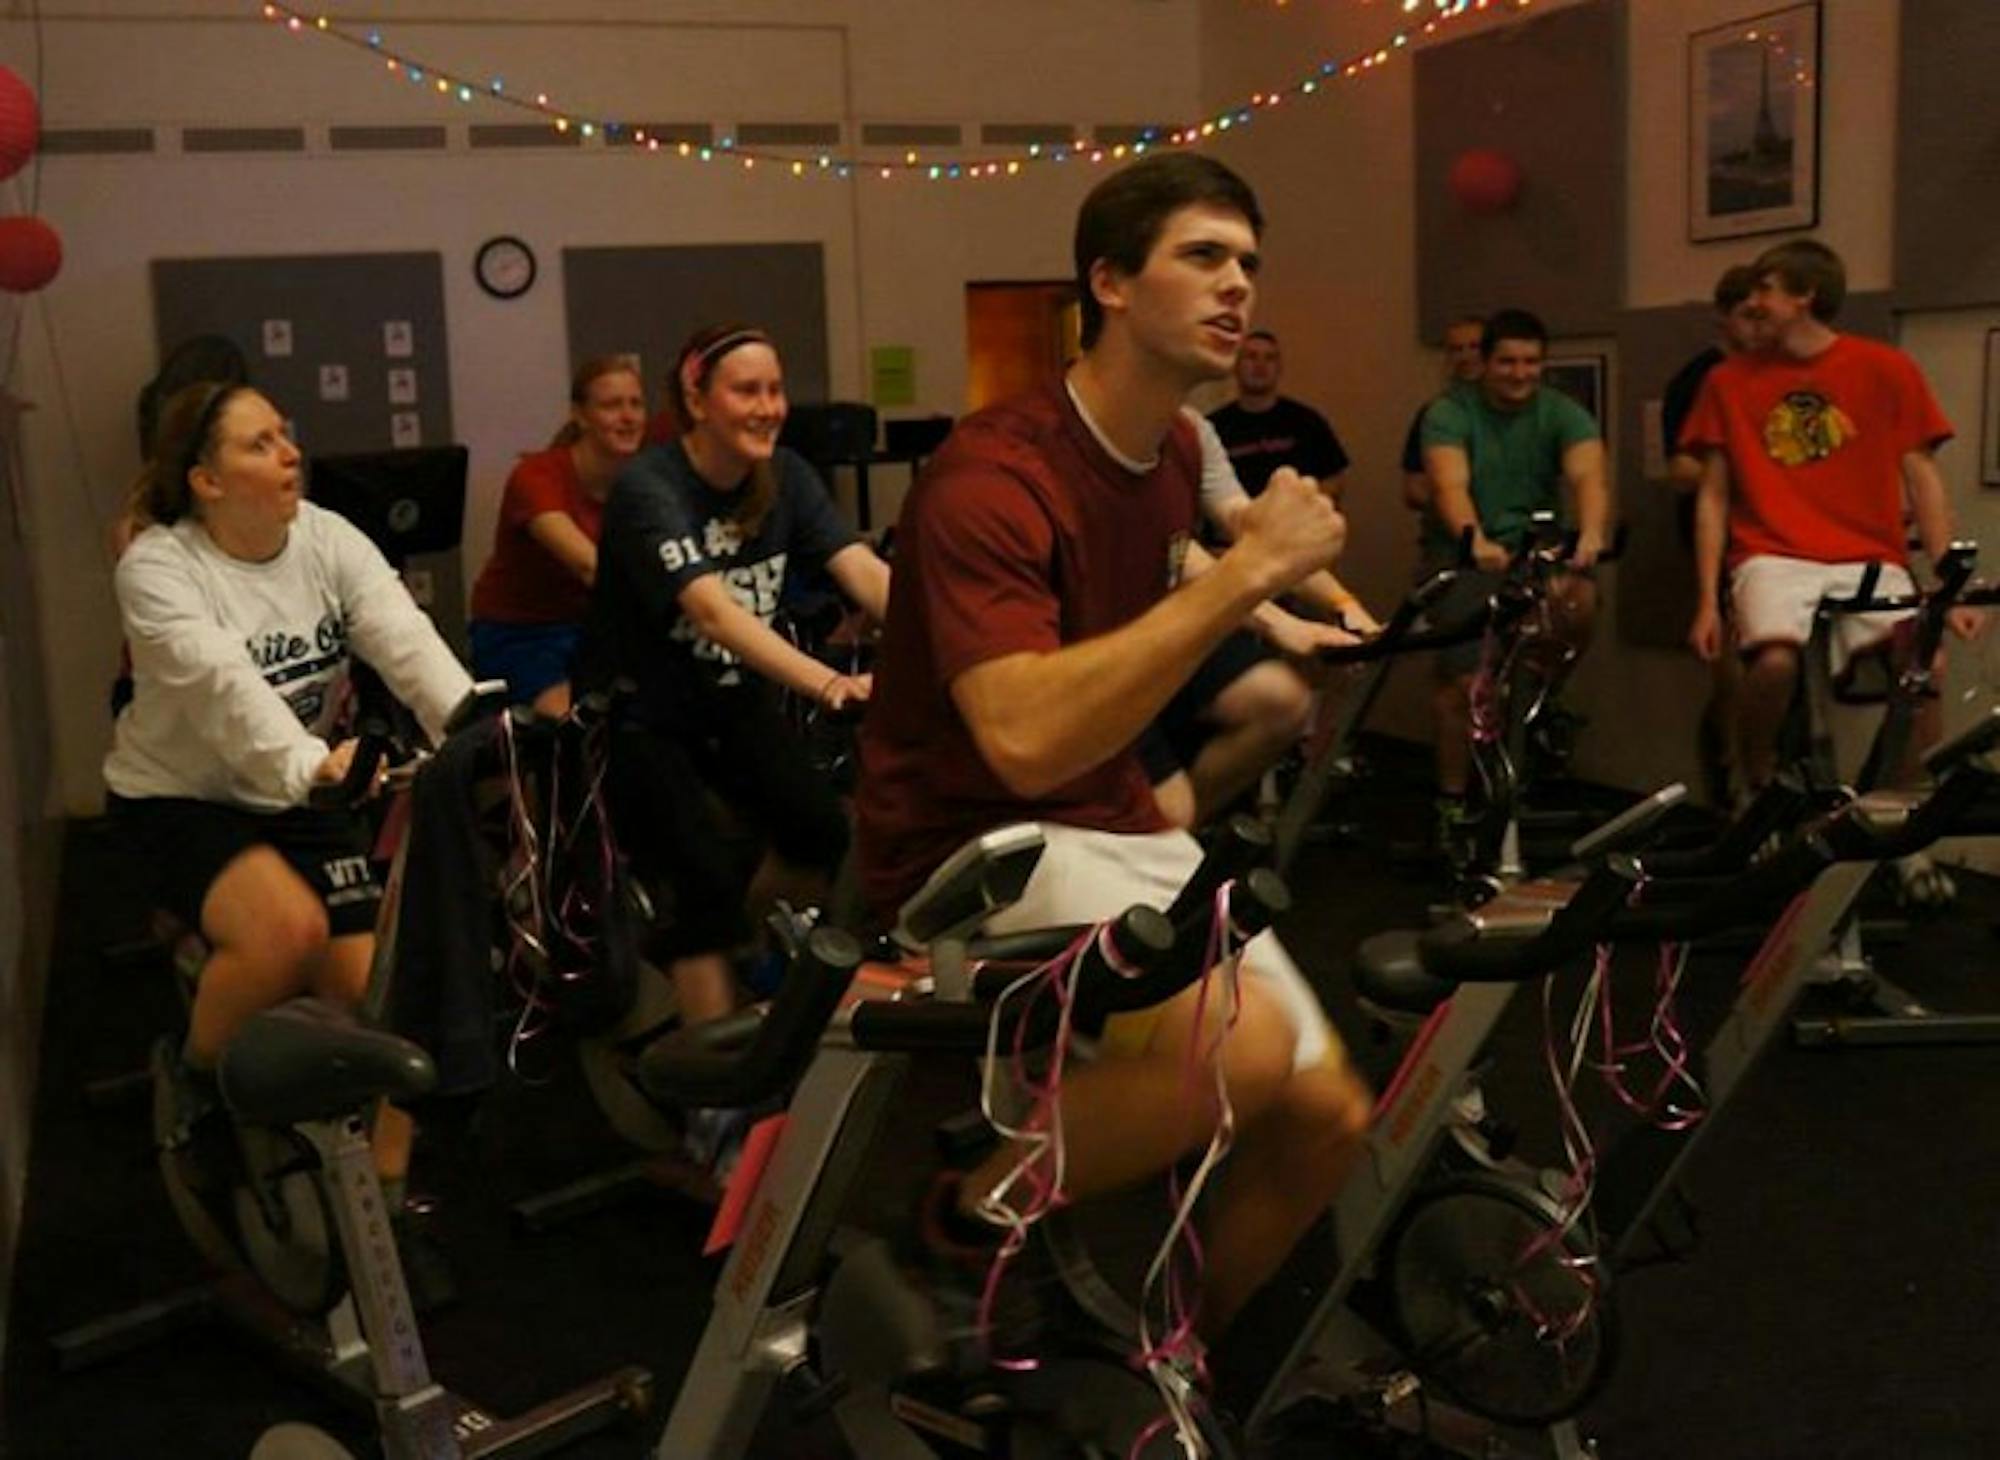 Spin-a-thon2